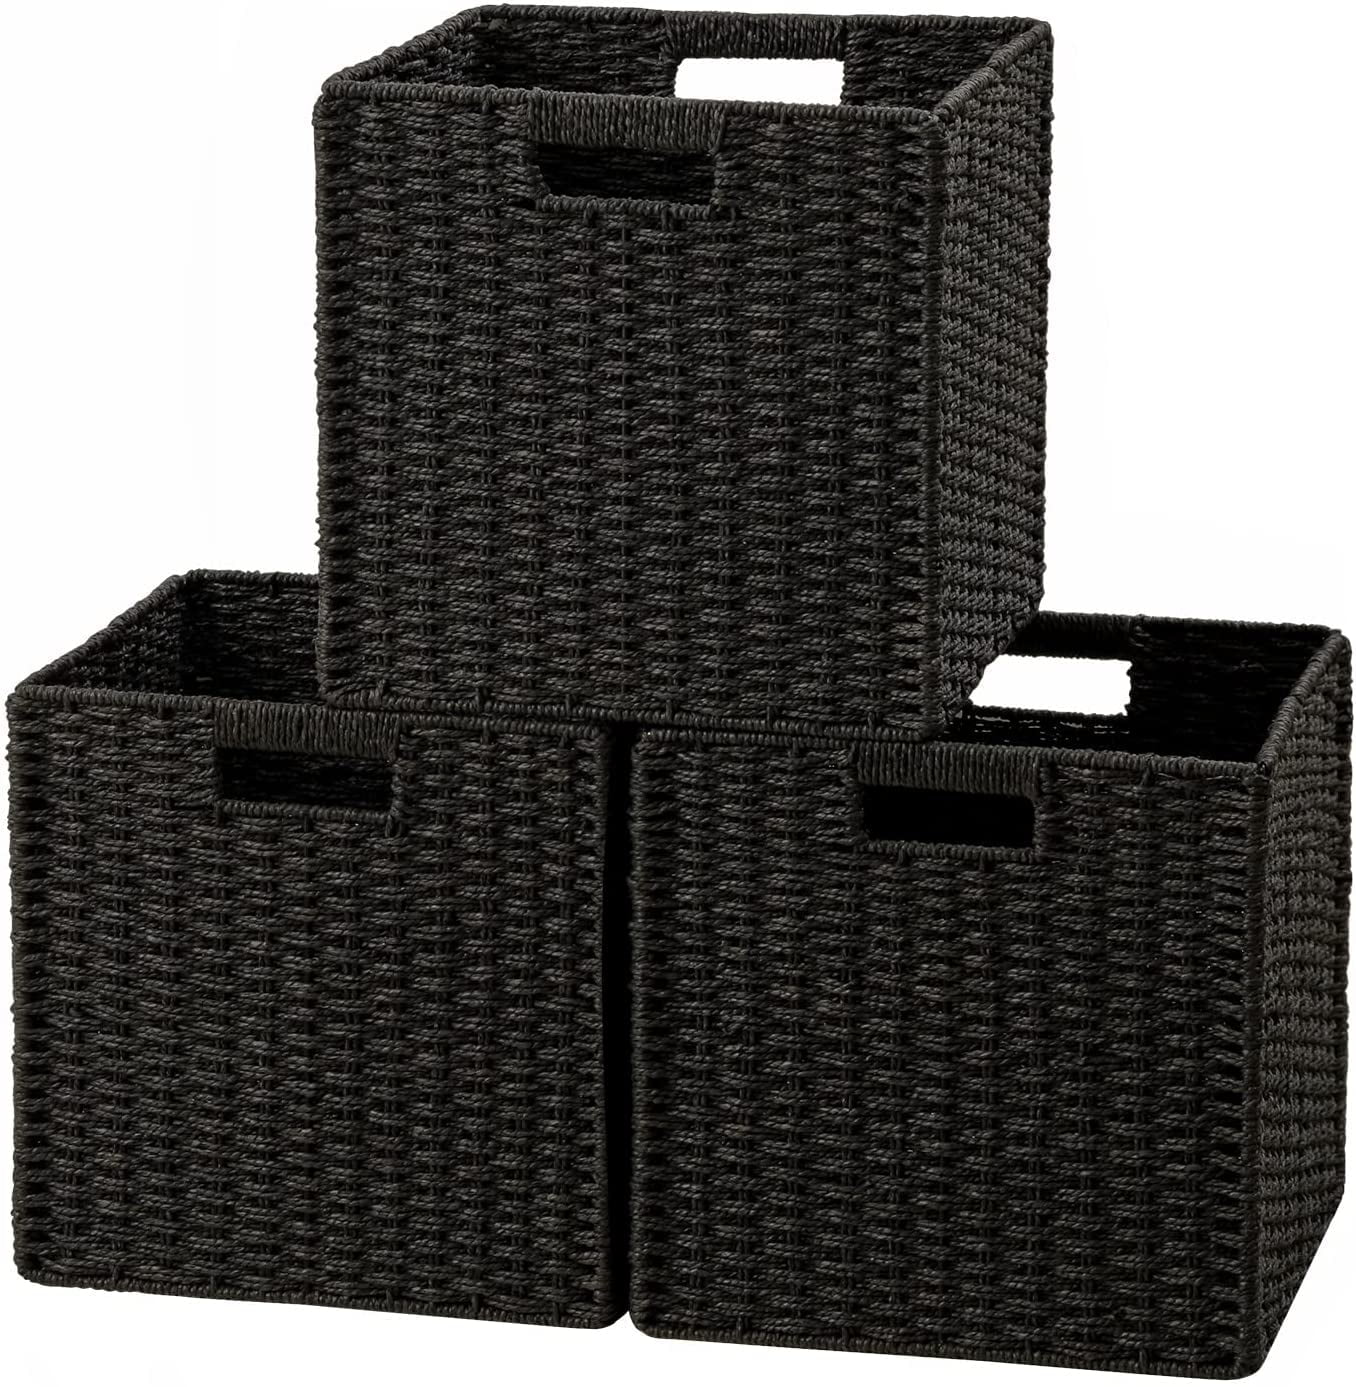 3-Pack 9 inch Square Wicker Storage Baskets with Liners - Small Woven Bins  for Organizing Kitchen, Closet Shelves, Bathroom, Laundry 